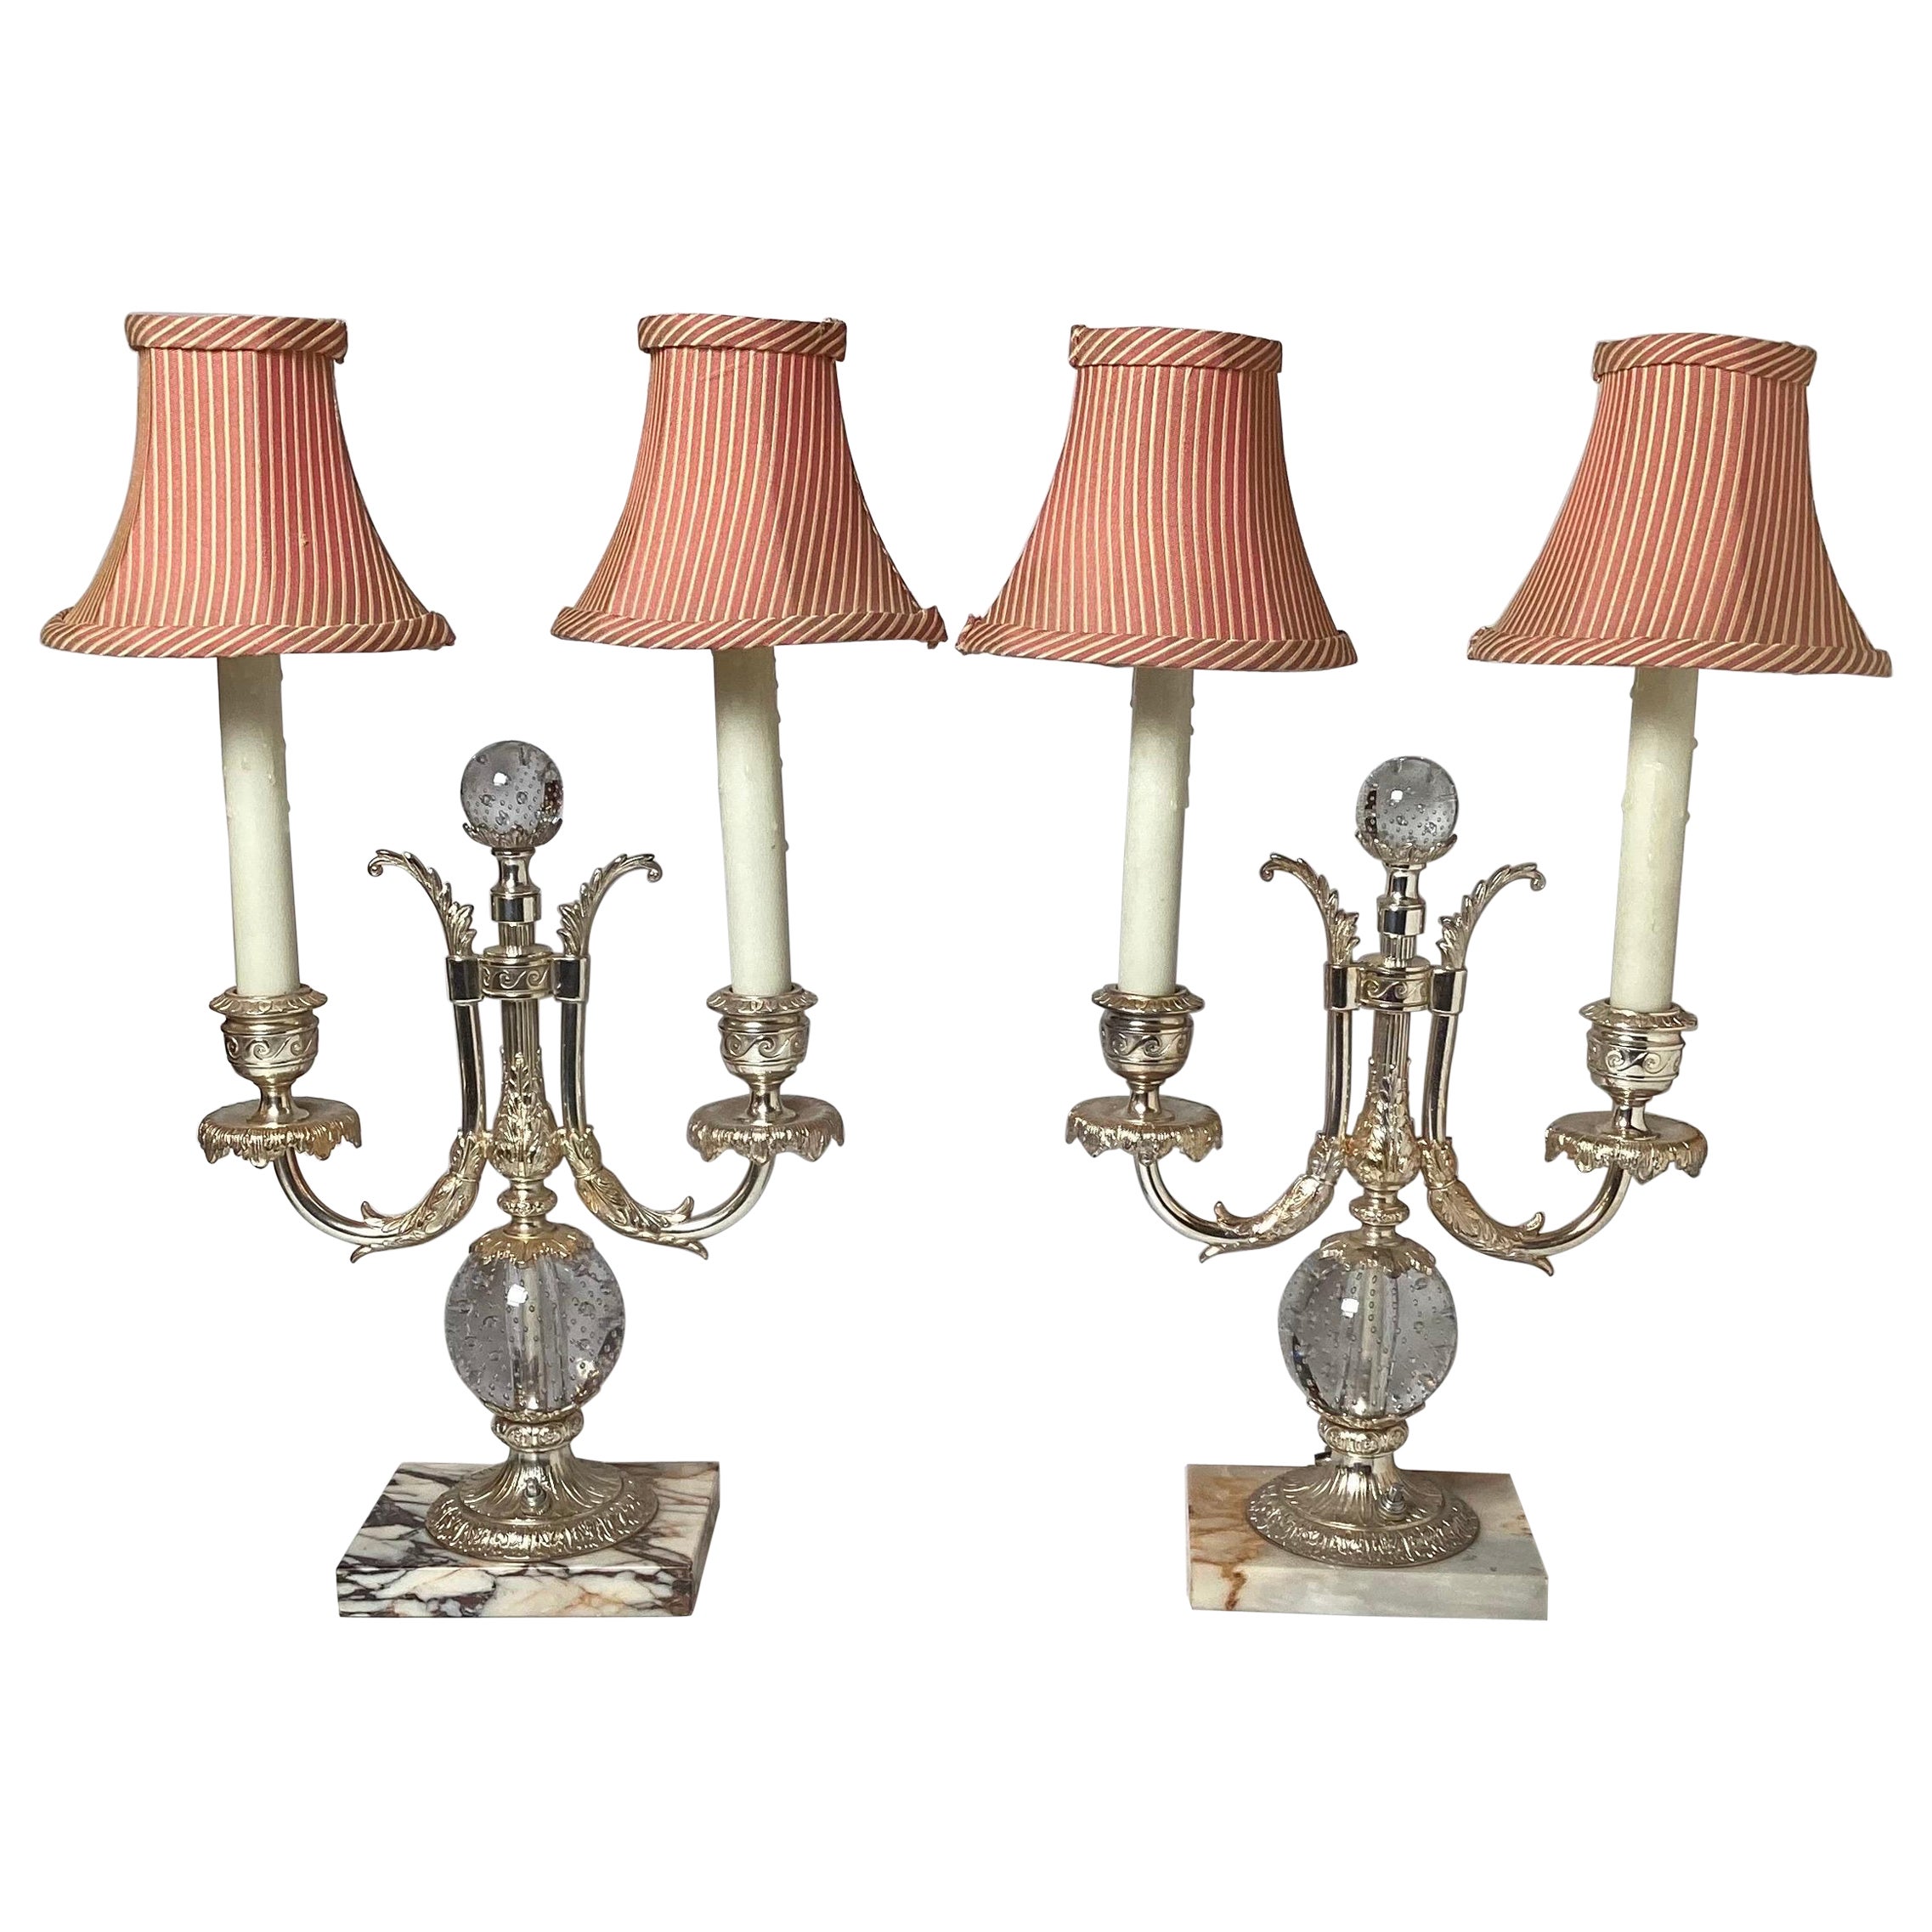 Pair of Silvered Bronze Candelabra Lamps by Pairpoint For Sale